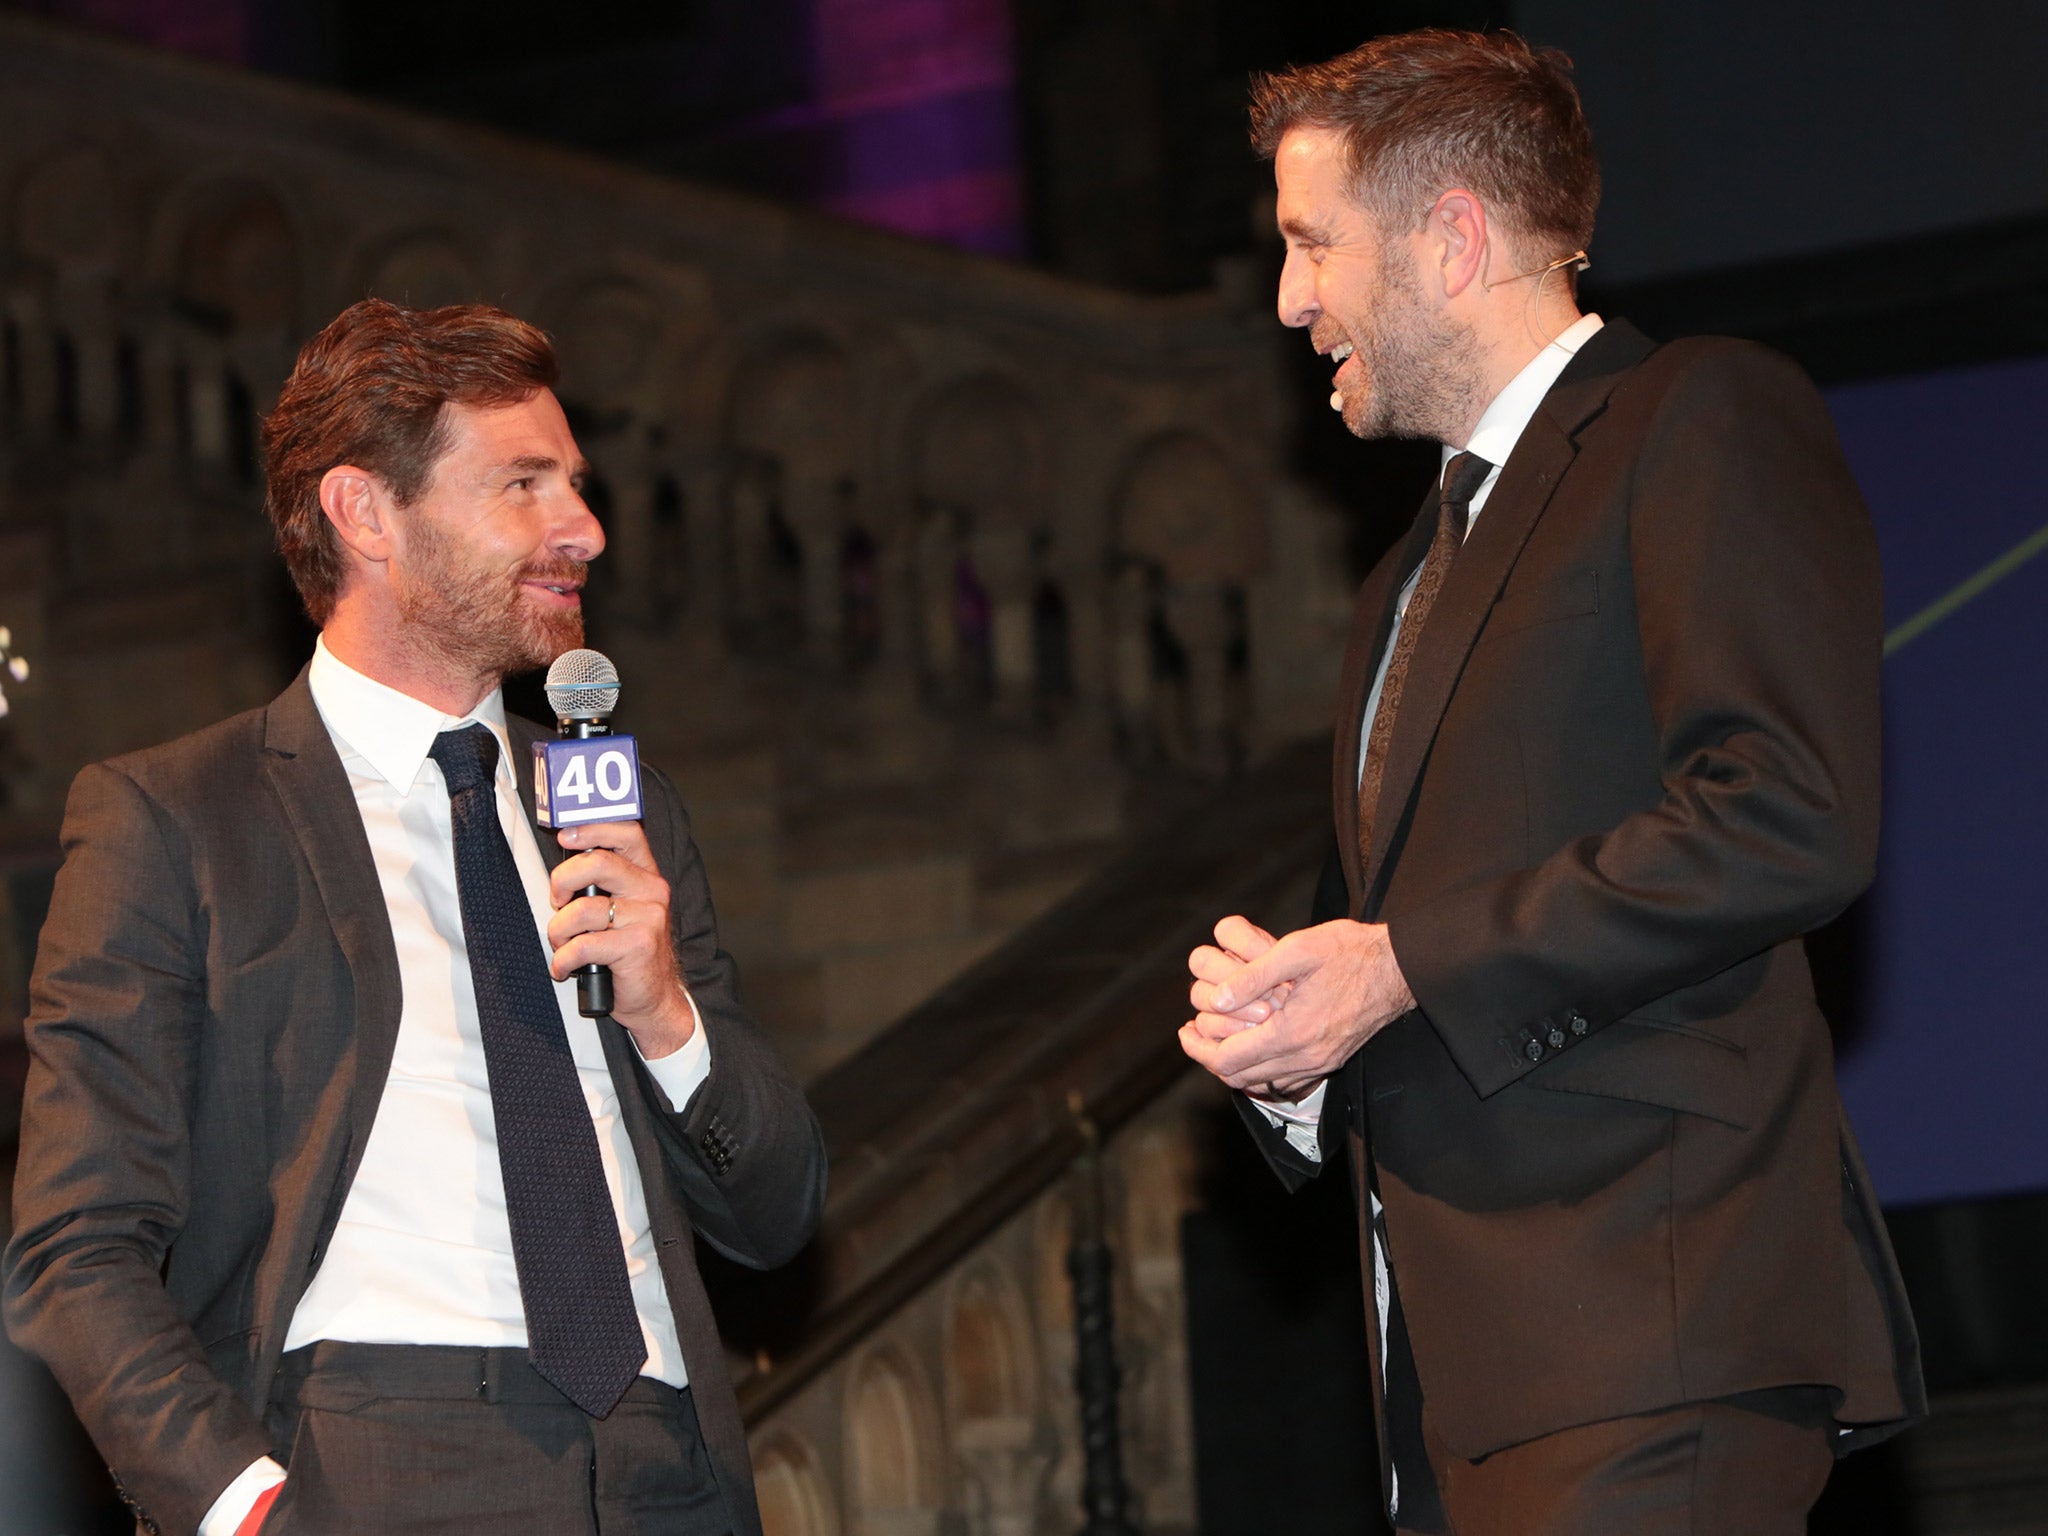 Villas-Boas discussed his career in Amsterdam on Tuesday night